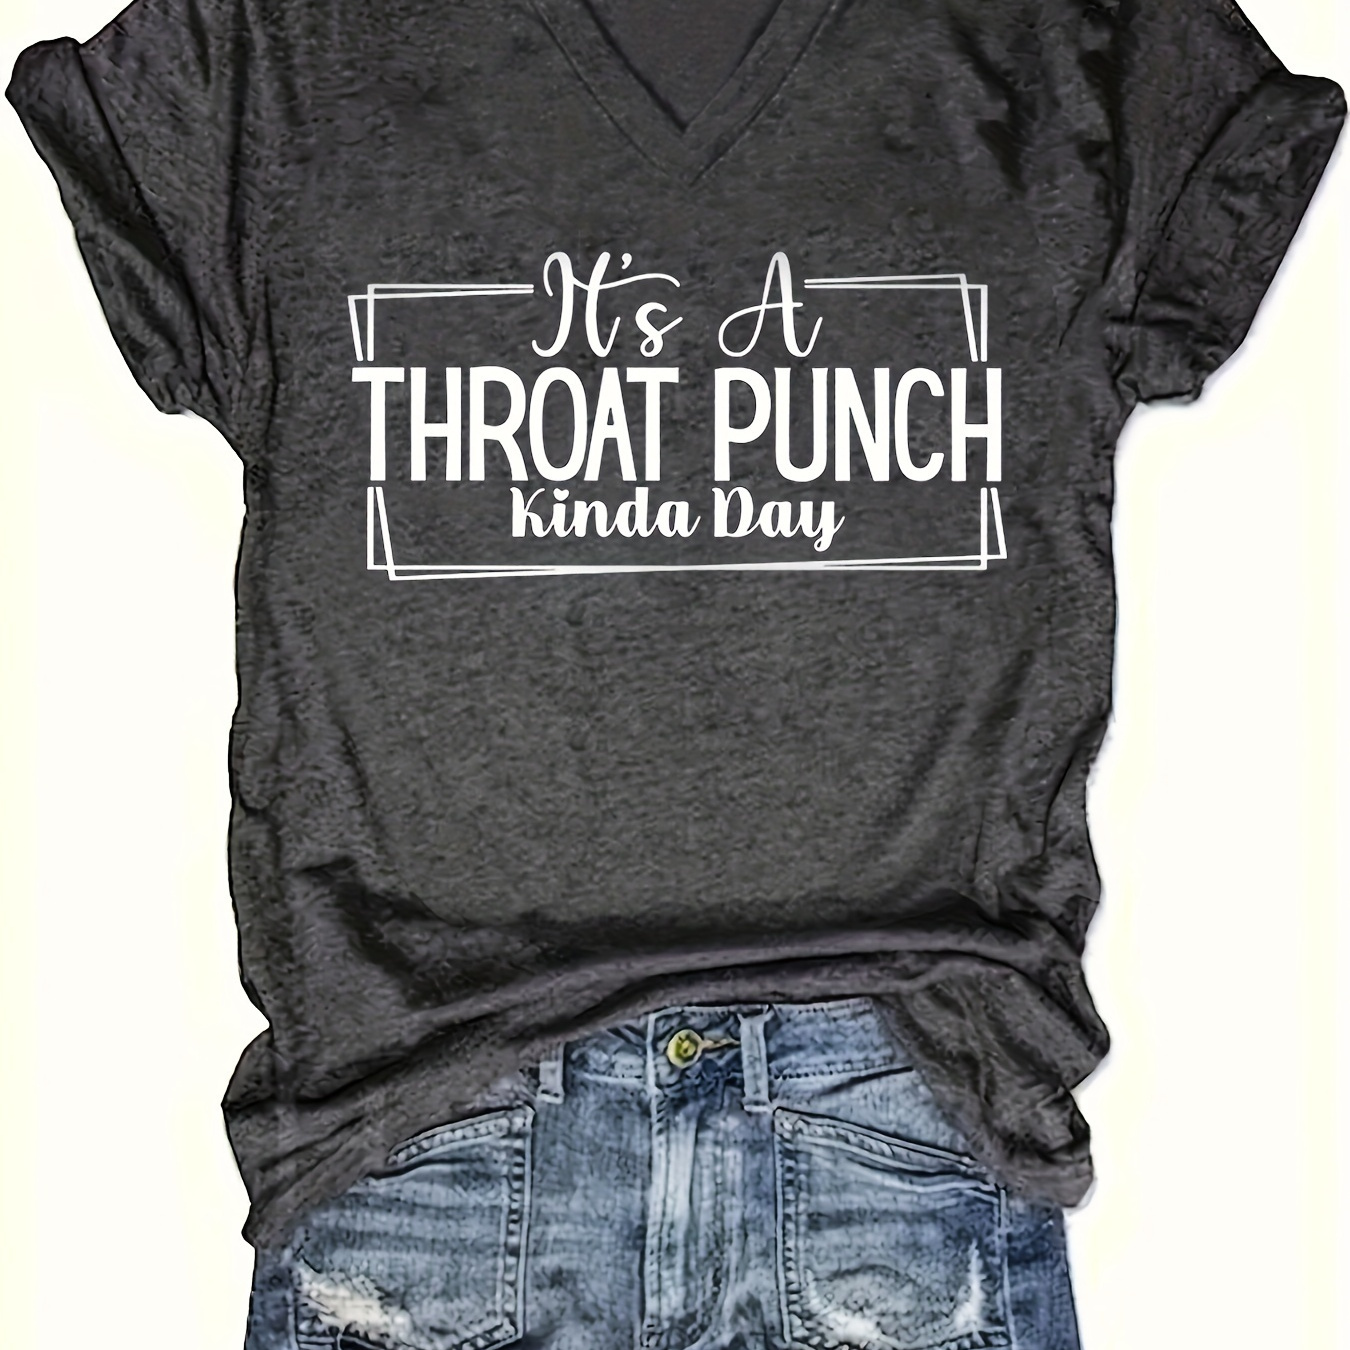 

Throat Punch Print T-shirt, Casual Short Sleeve Crew Neck Top For Spring & Summer, Women's Clothing